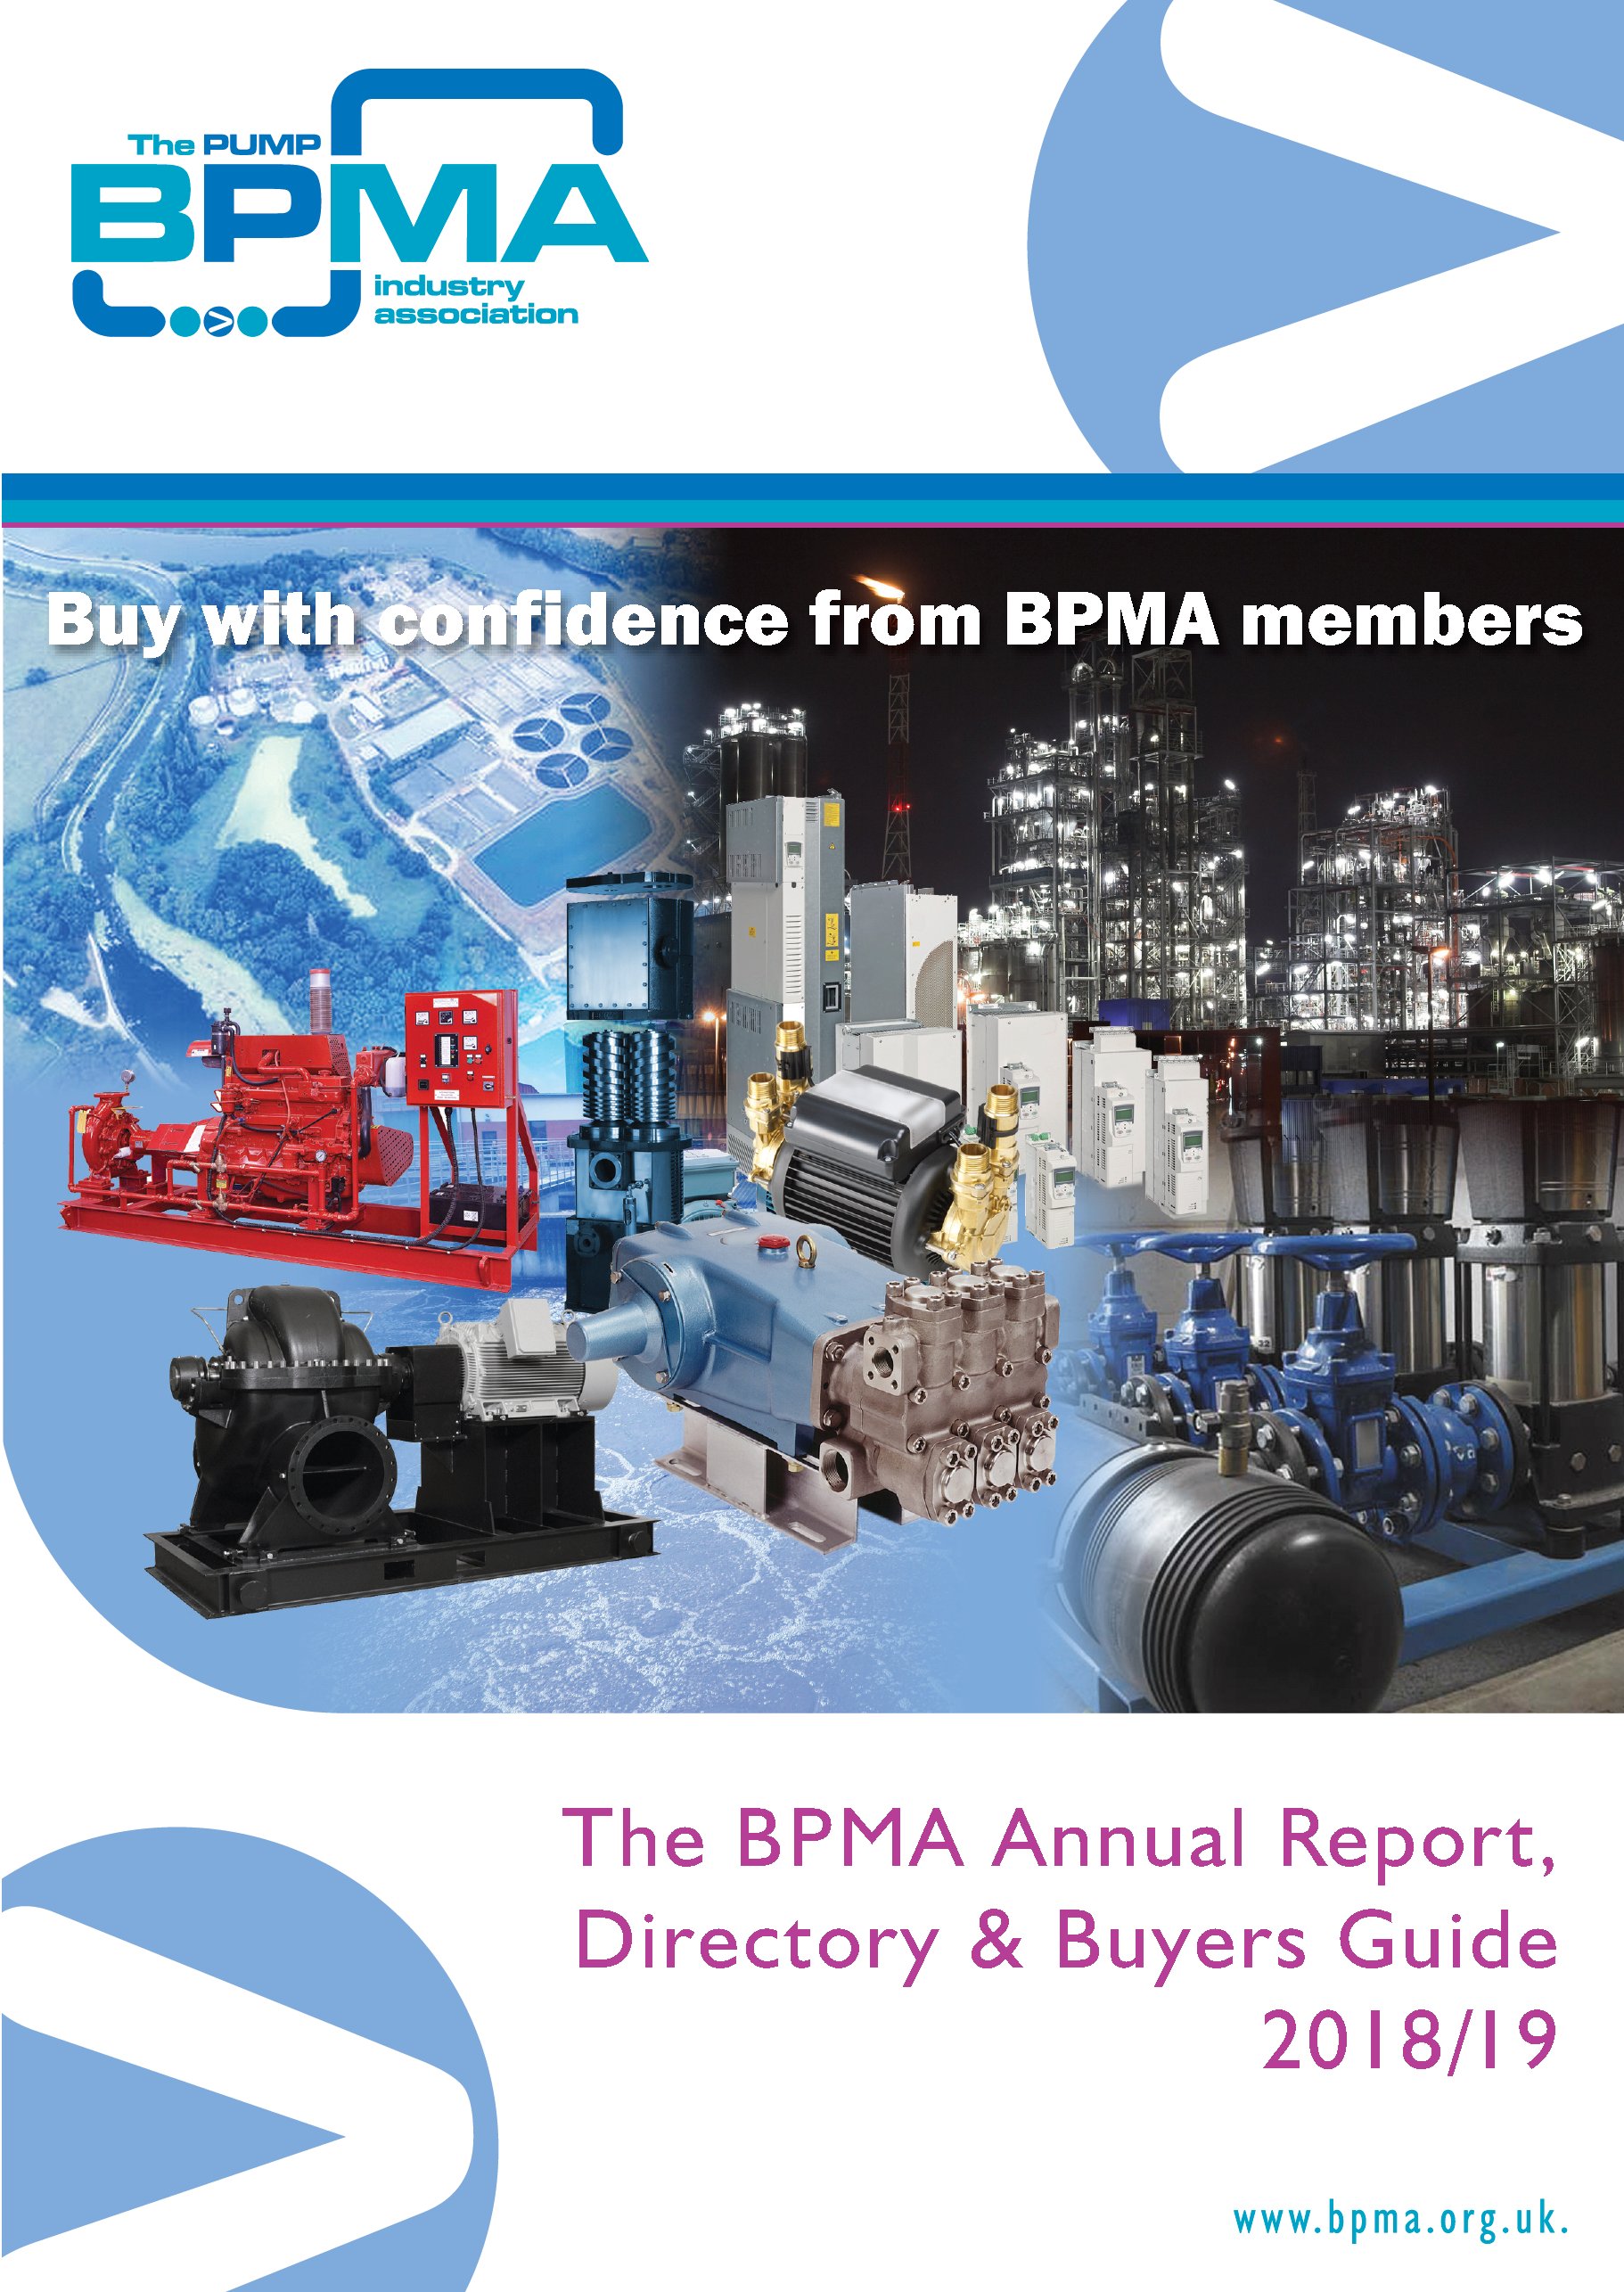 The BPMA’s 2018/19 Buyers’ Guide & Directory.